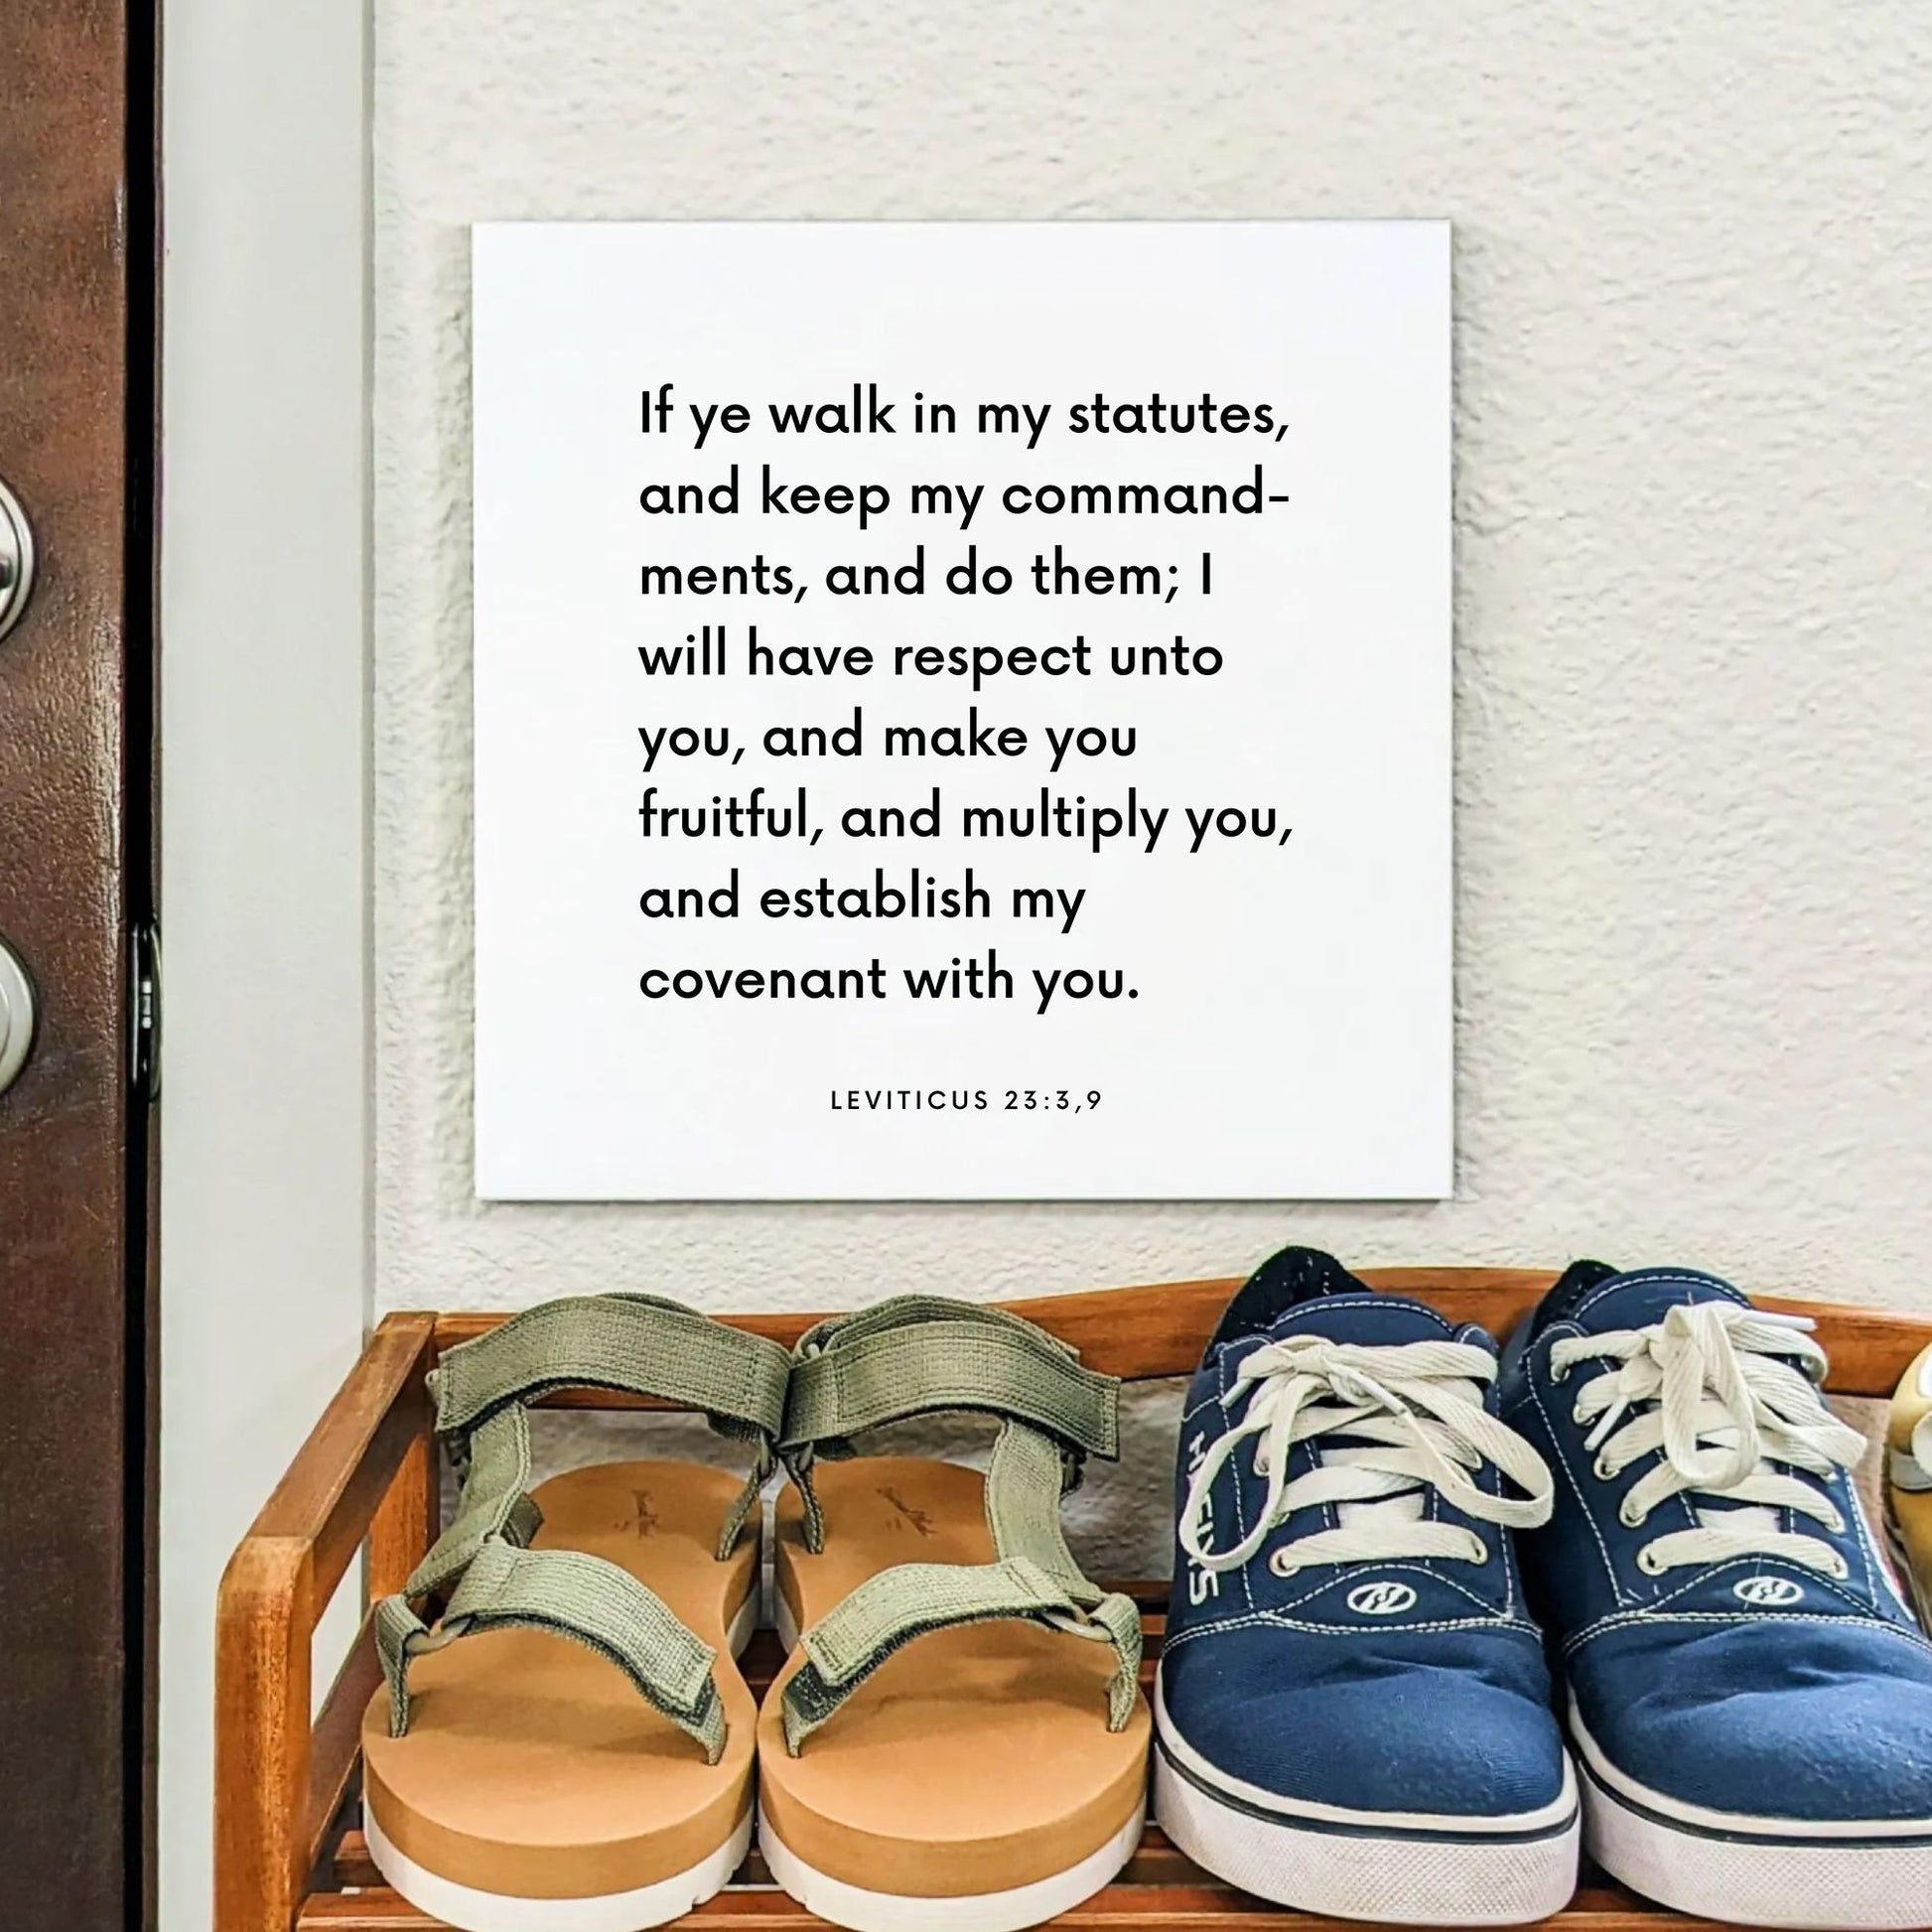 Shoes mouting of the scripture tile for Leviticus 23:3,9 - "I will have respect unto you, and make you fruitful"